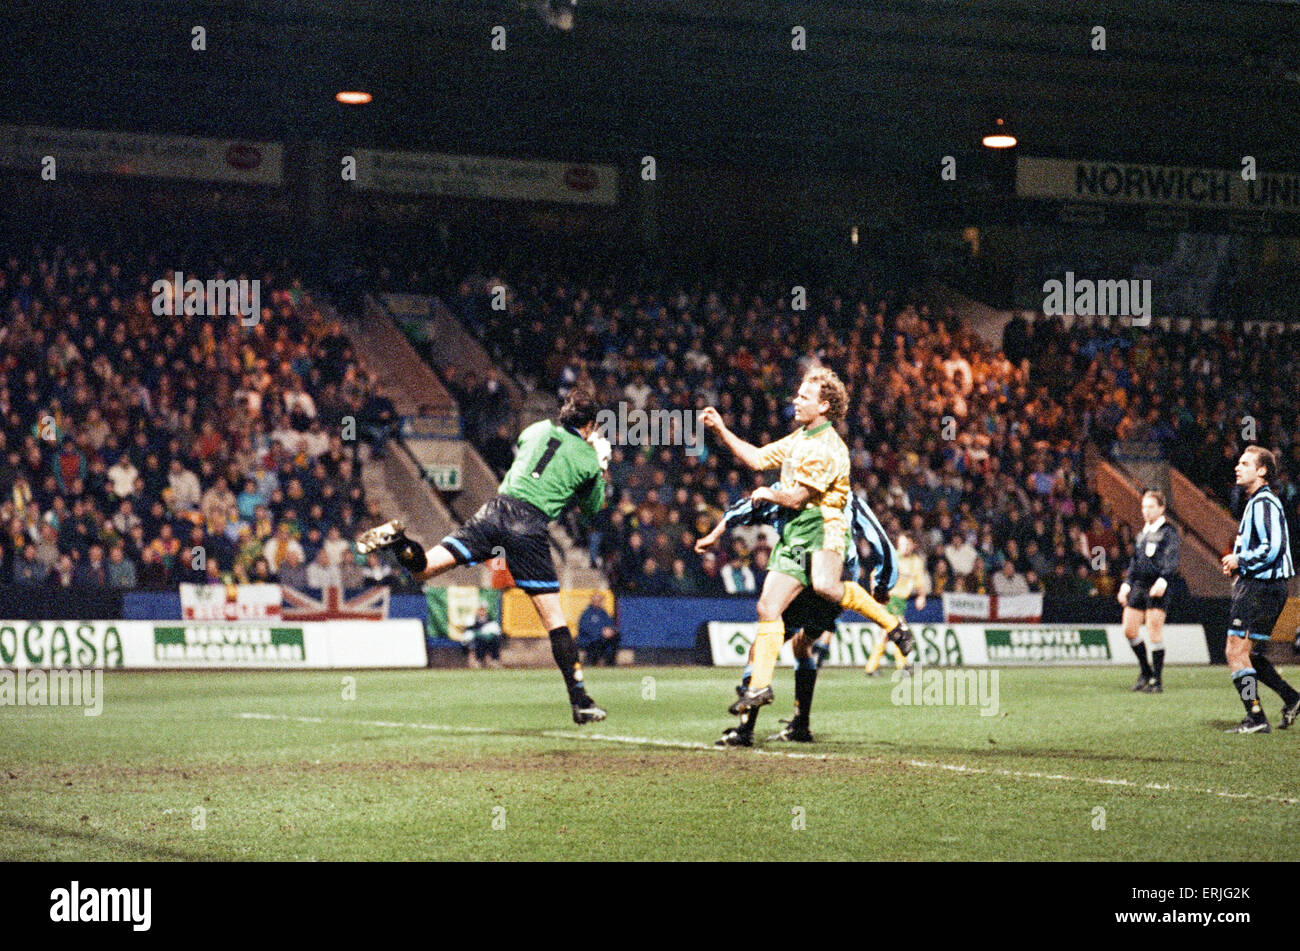 Norwich City 0 v Inter Milan 1 UEFA Cup Round 16 first leg at Bramall Lane. Inter Milan won one nil courtesy of a Dennis Berkamp penalty in the 80th minute. (Picture) Inter Milan's goalkeeper beat's Jeremy Goss to the ball. 24th November 1993. Stock Photo